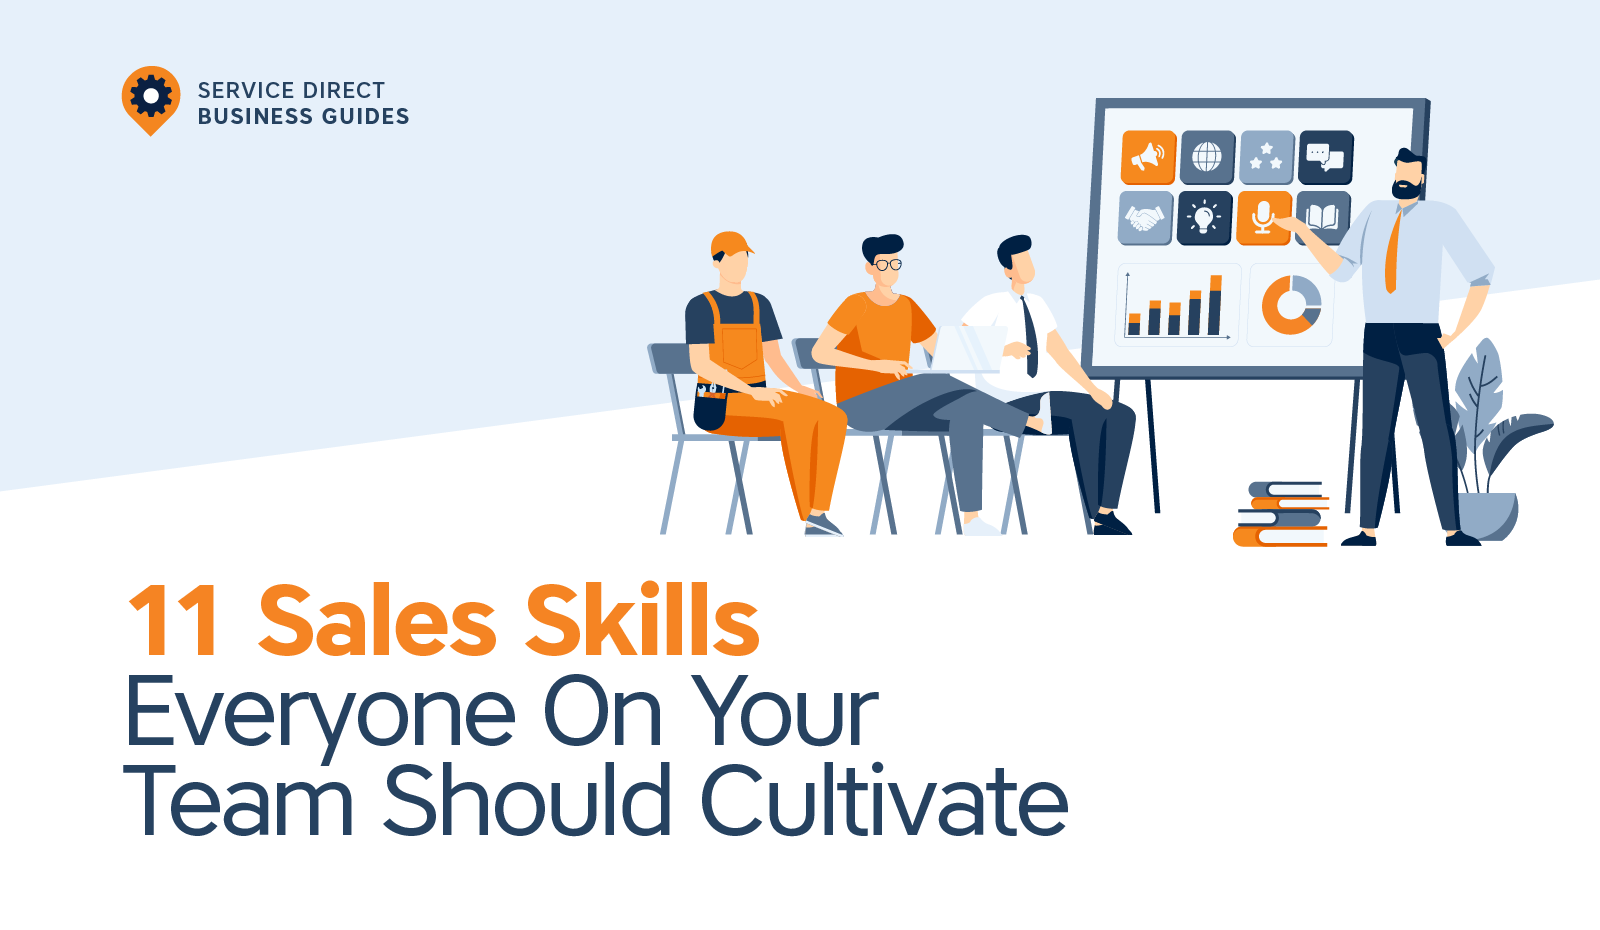 11 Sales Skills Everyone on Your Team Should Cultivate